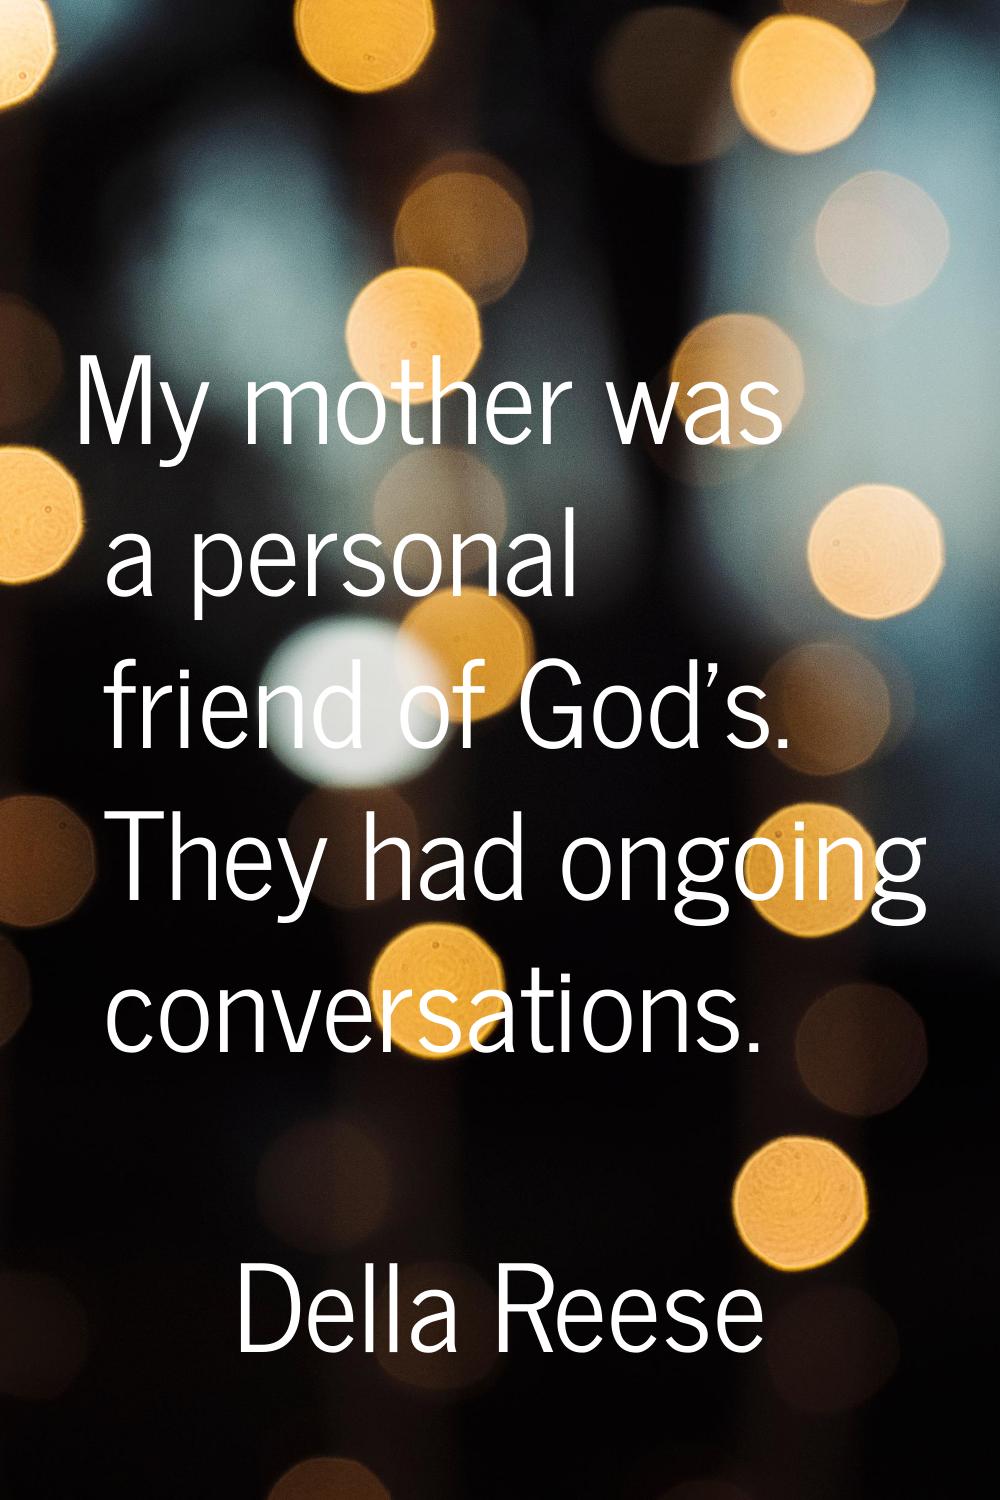 My mother was a personal friend of God's. They had ongoing conversations.